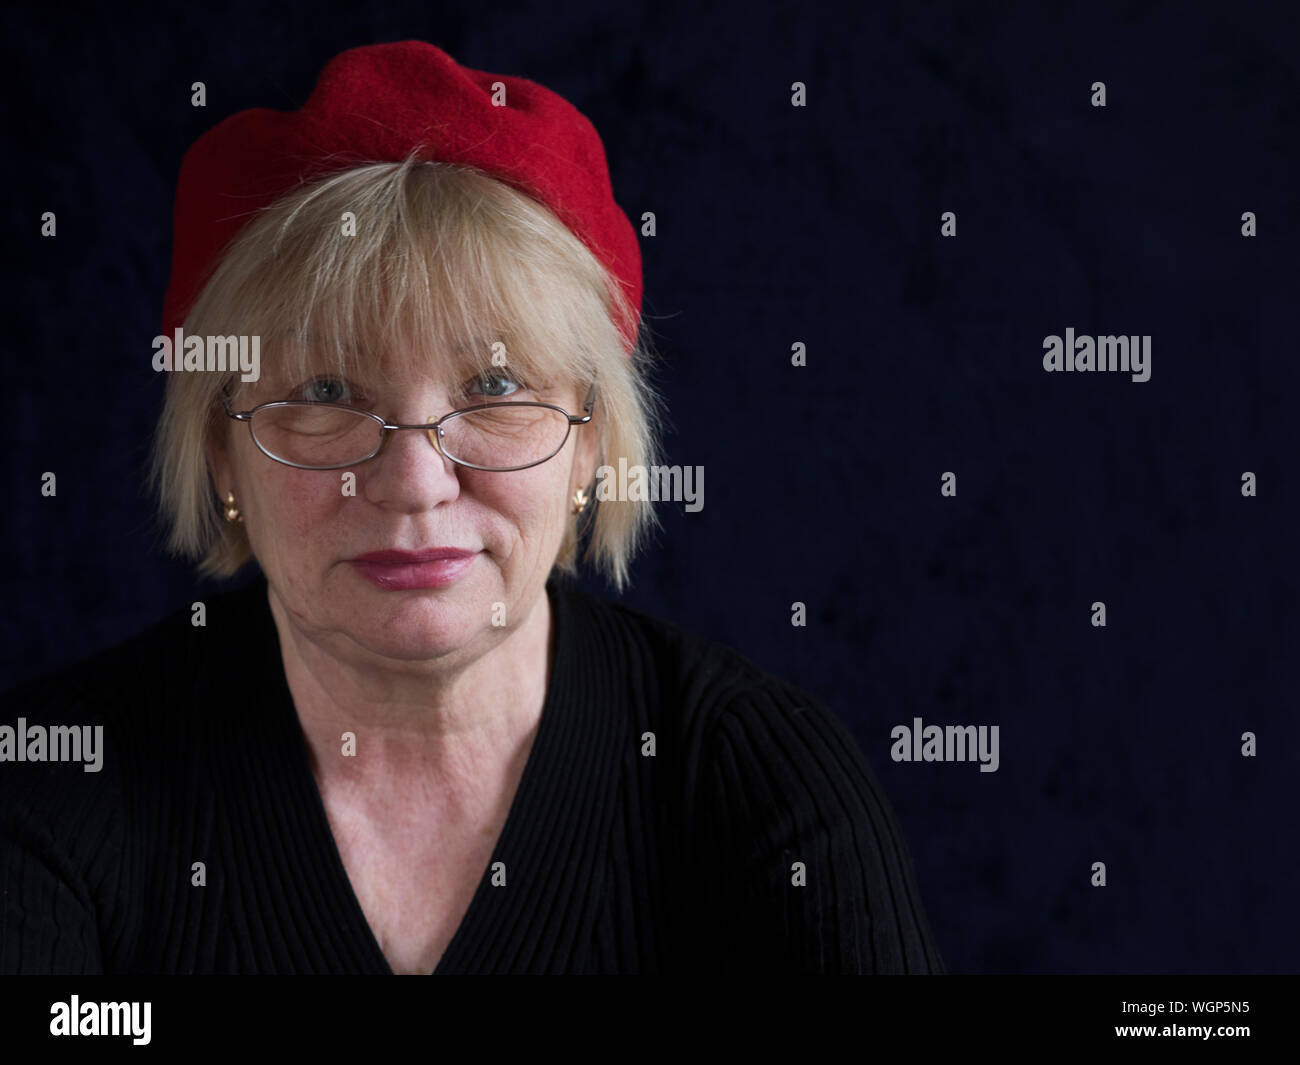 Portrait Of Mature Woman With Red Cap Against Black Background Stock Photo